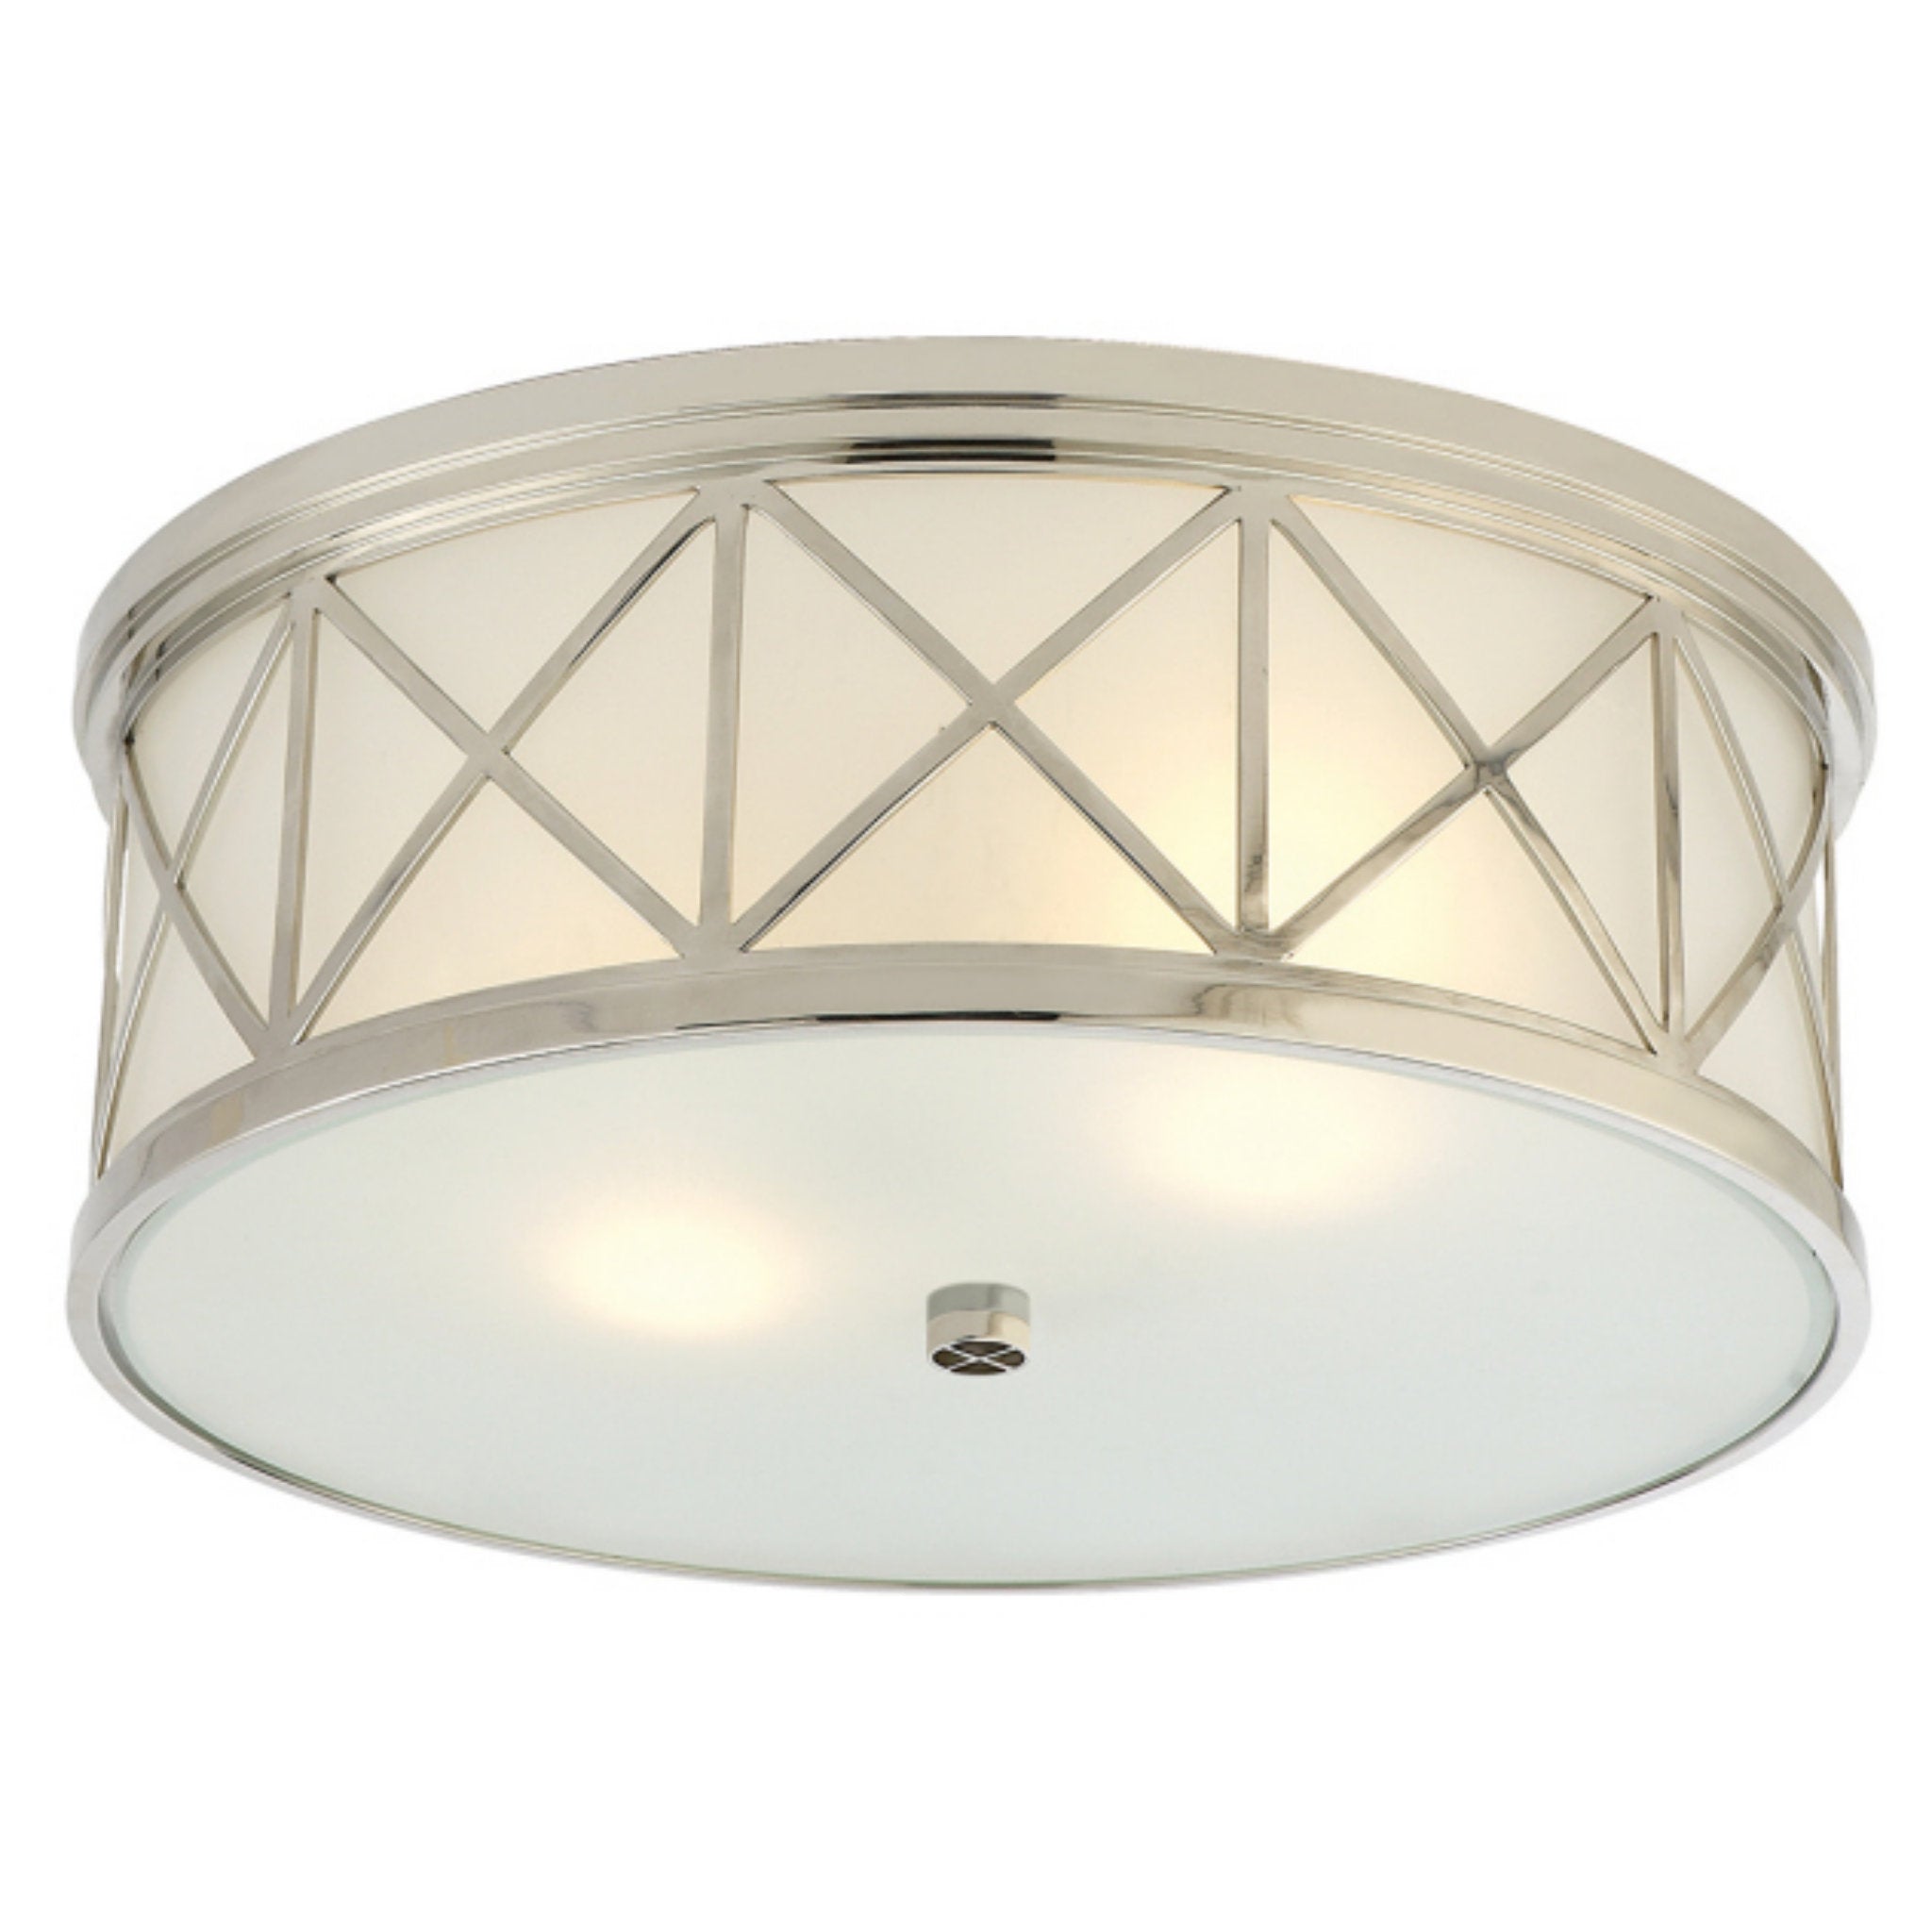 Suzanne Kasler Montpelier Large Flush Mount in Polished Nickel with Frosted Glass